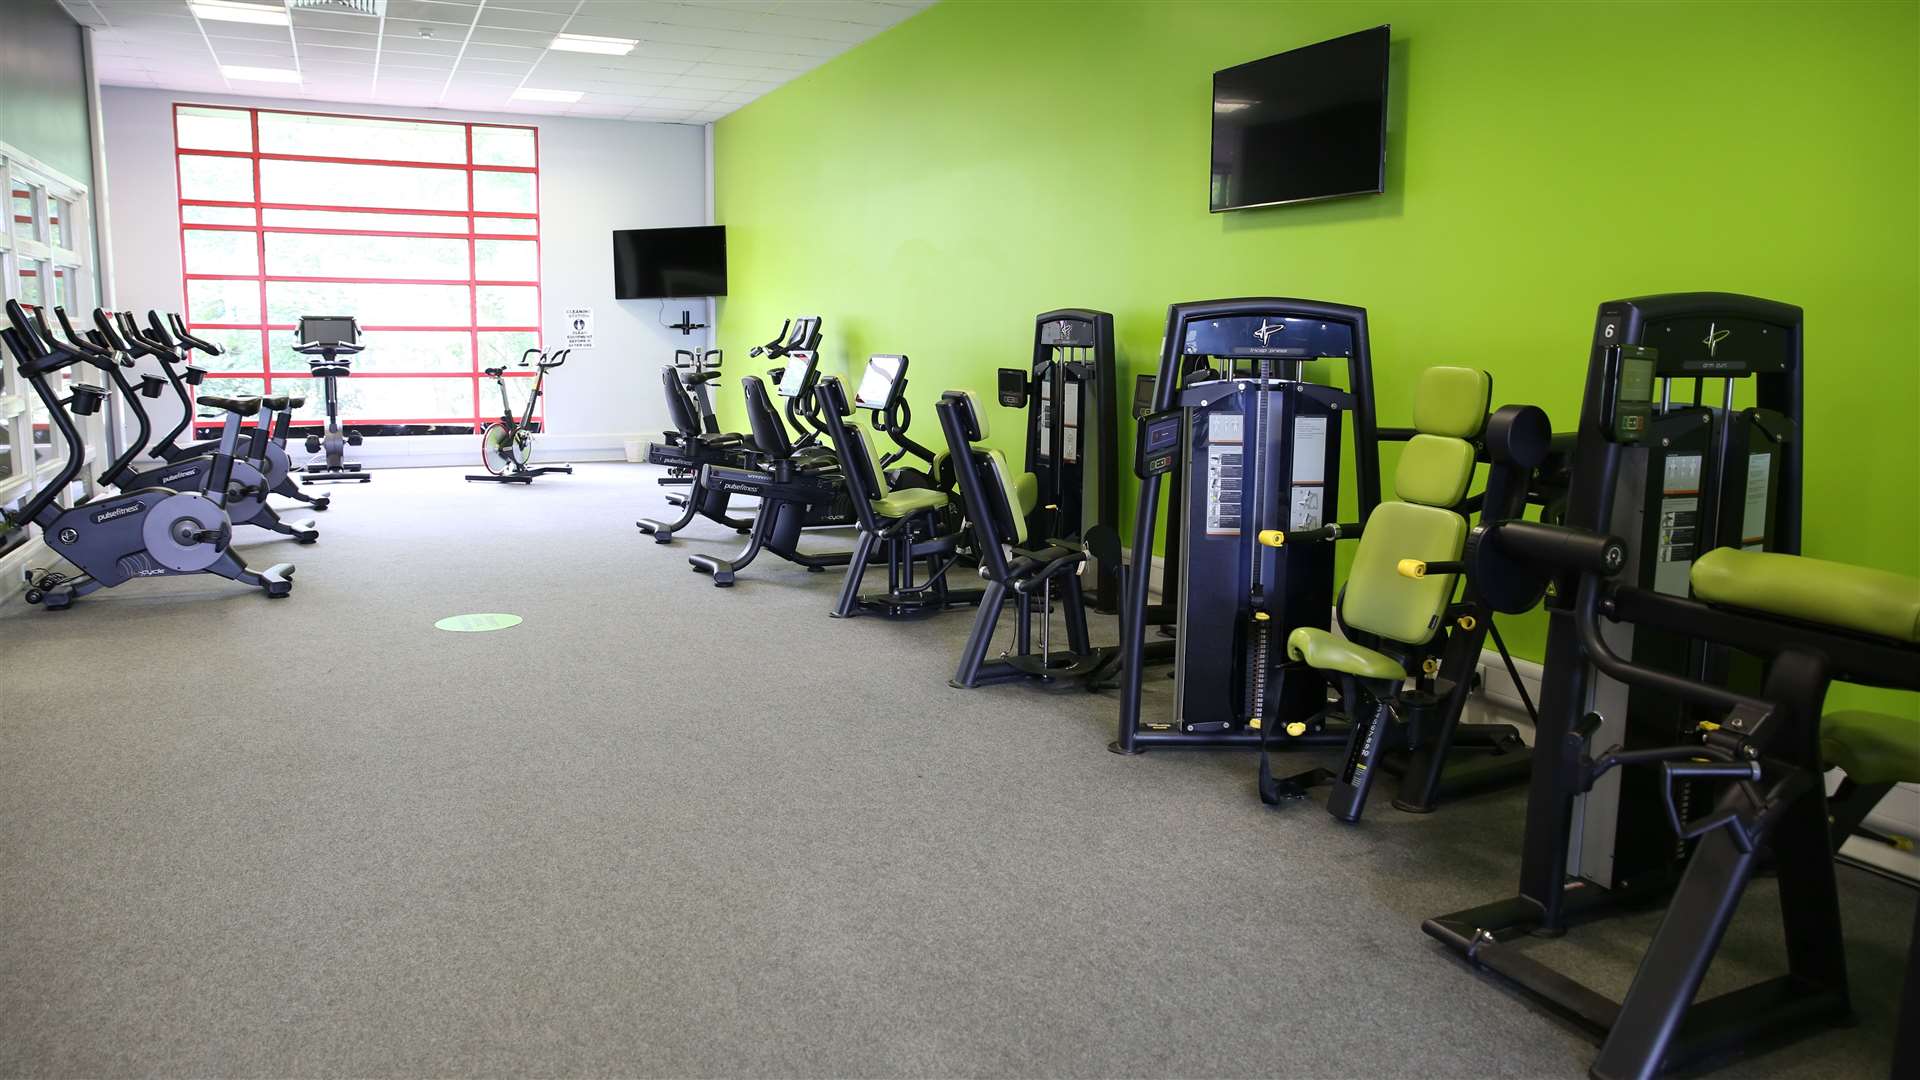 The gym inside the current centre